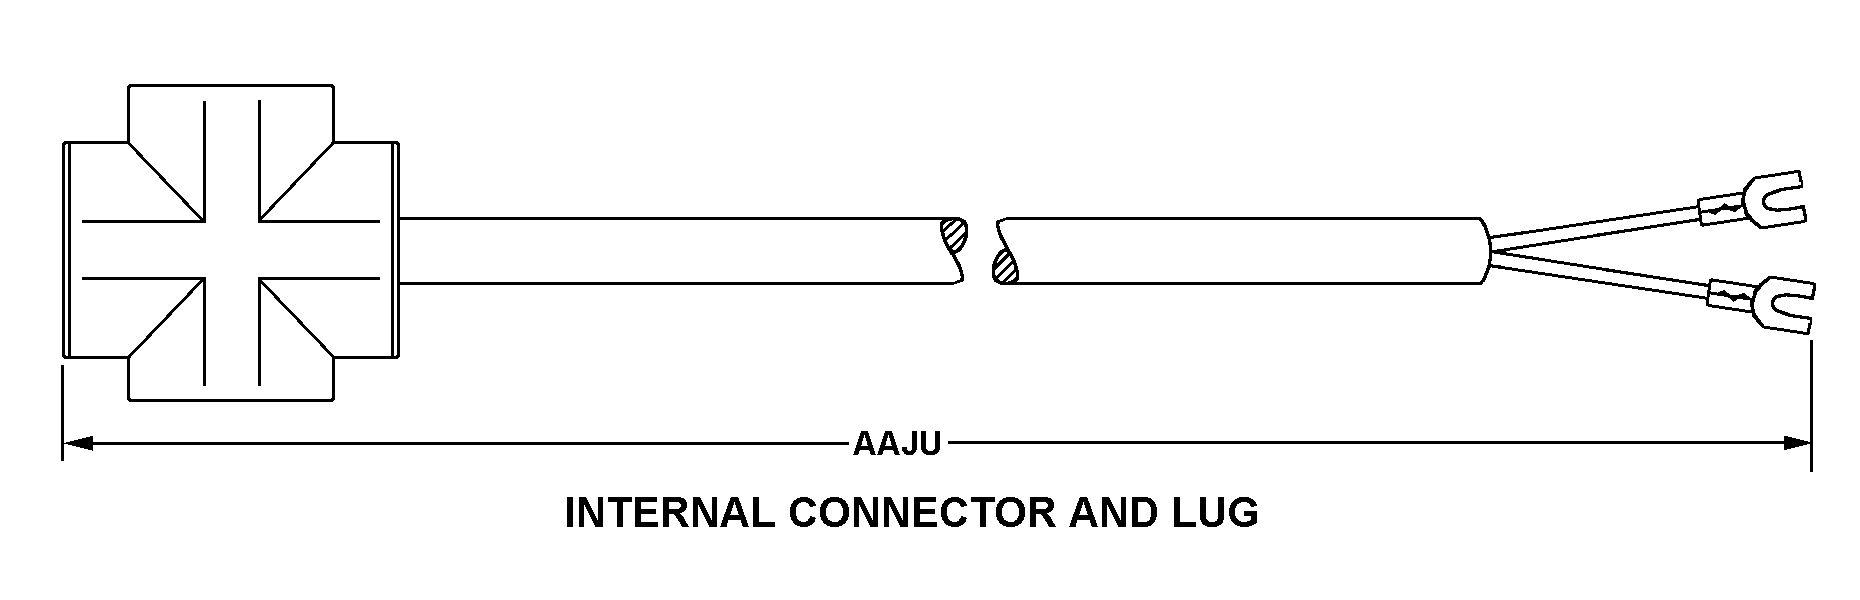 INTERNAL CONNECTOR AND LUG style nsn 6150-00-087-4920